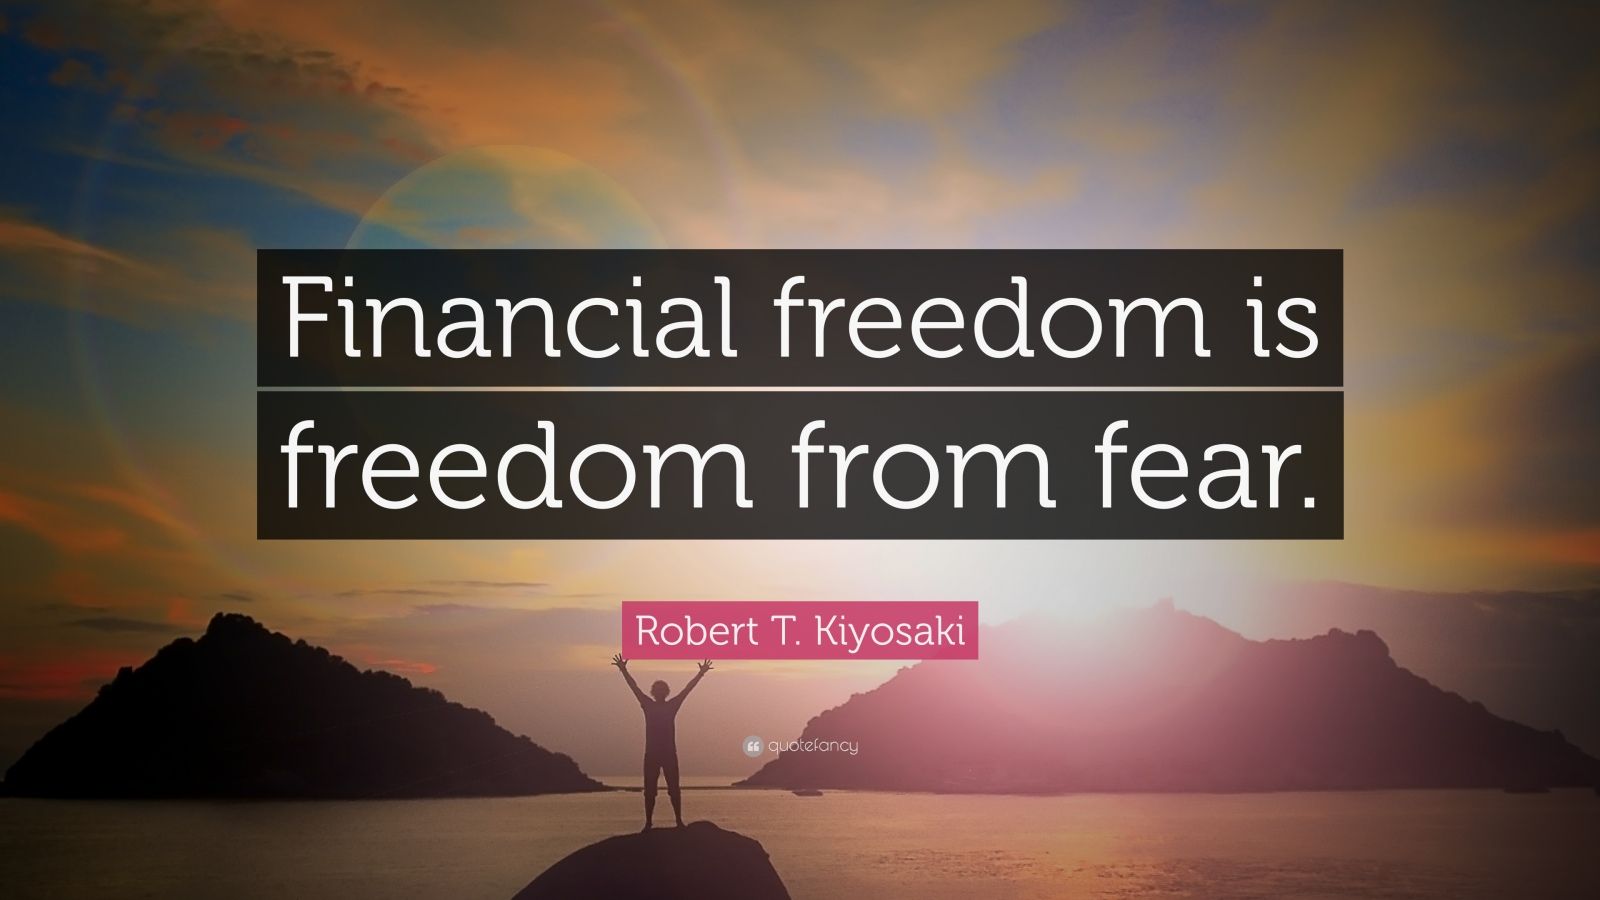 Robert T. Kiyosaki Quote: “Financial freedom is freedom from fear.” (19